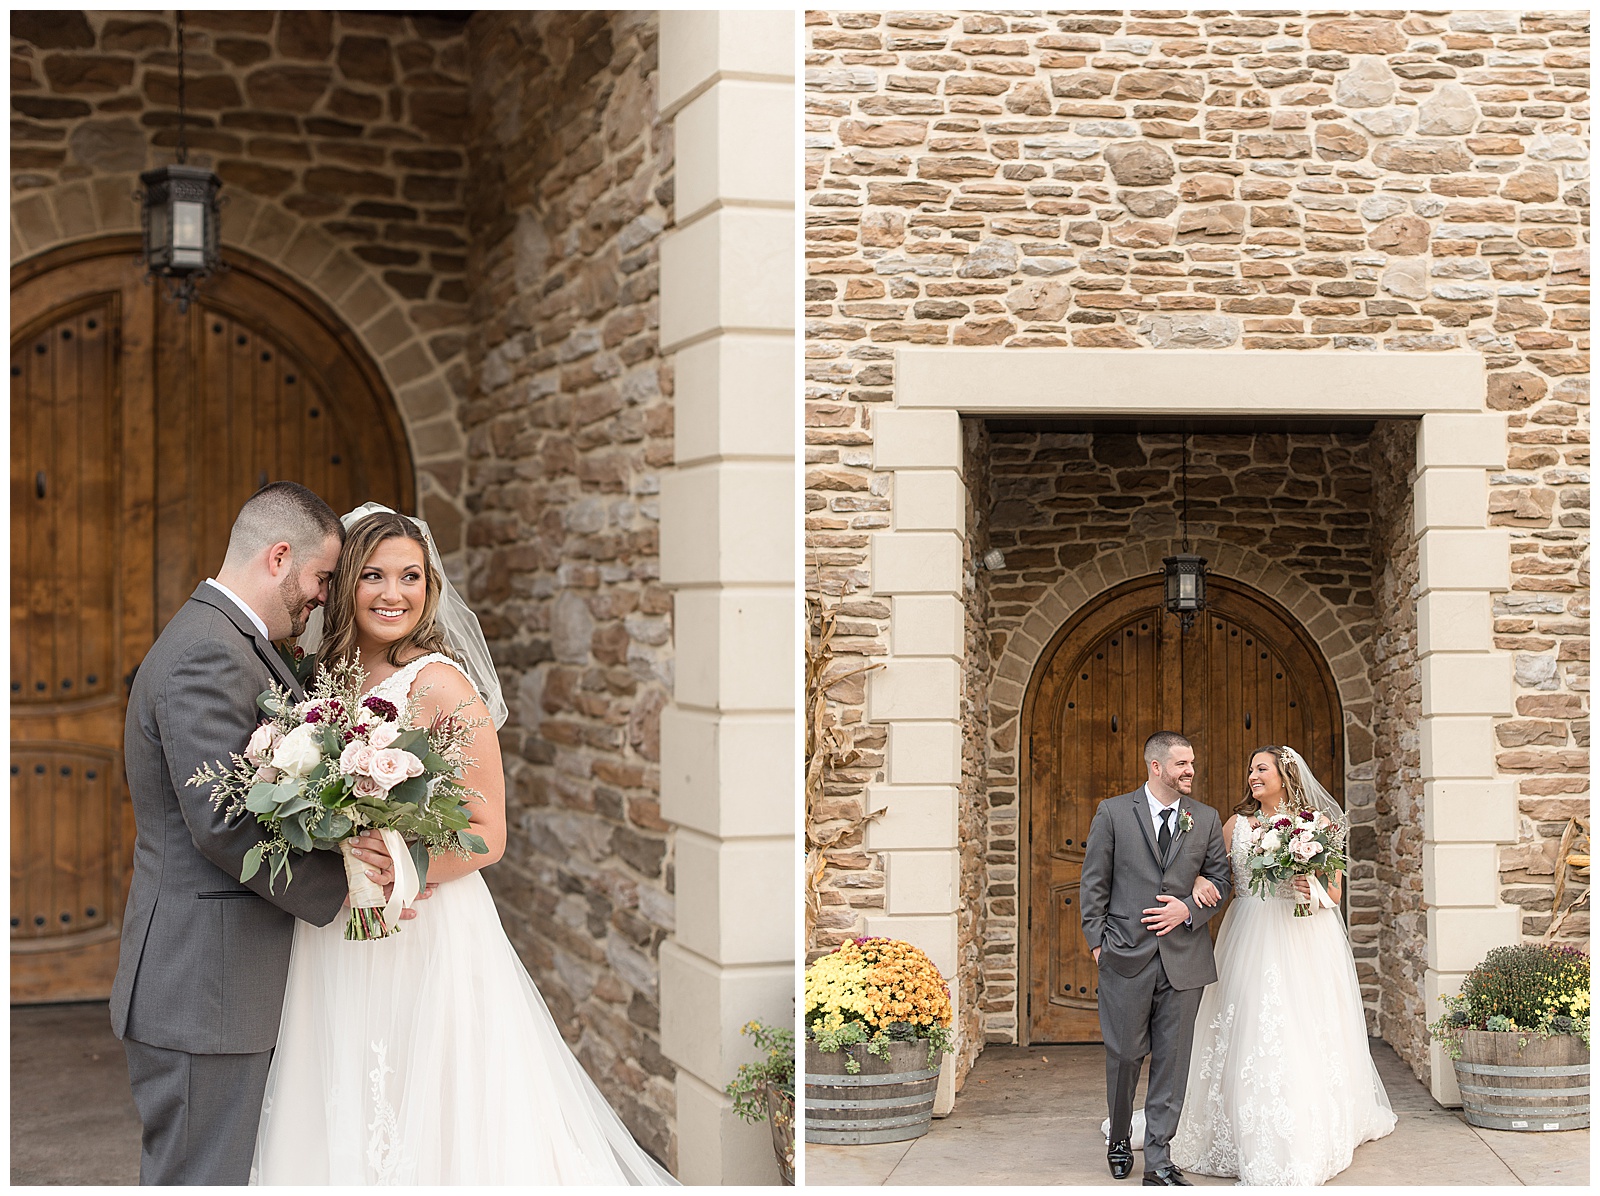 bride and groom with linked arms looking at each other smiling outside stone building on rainy wedding day